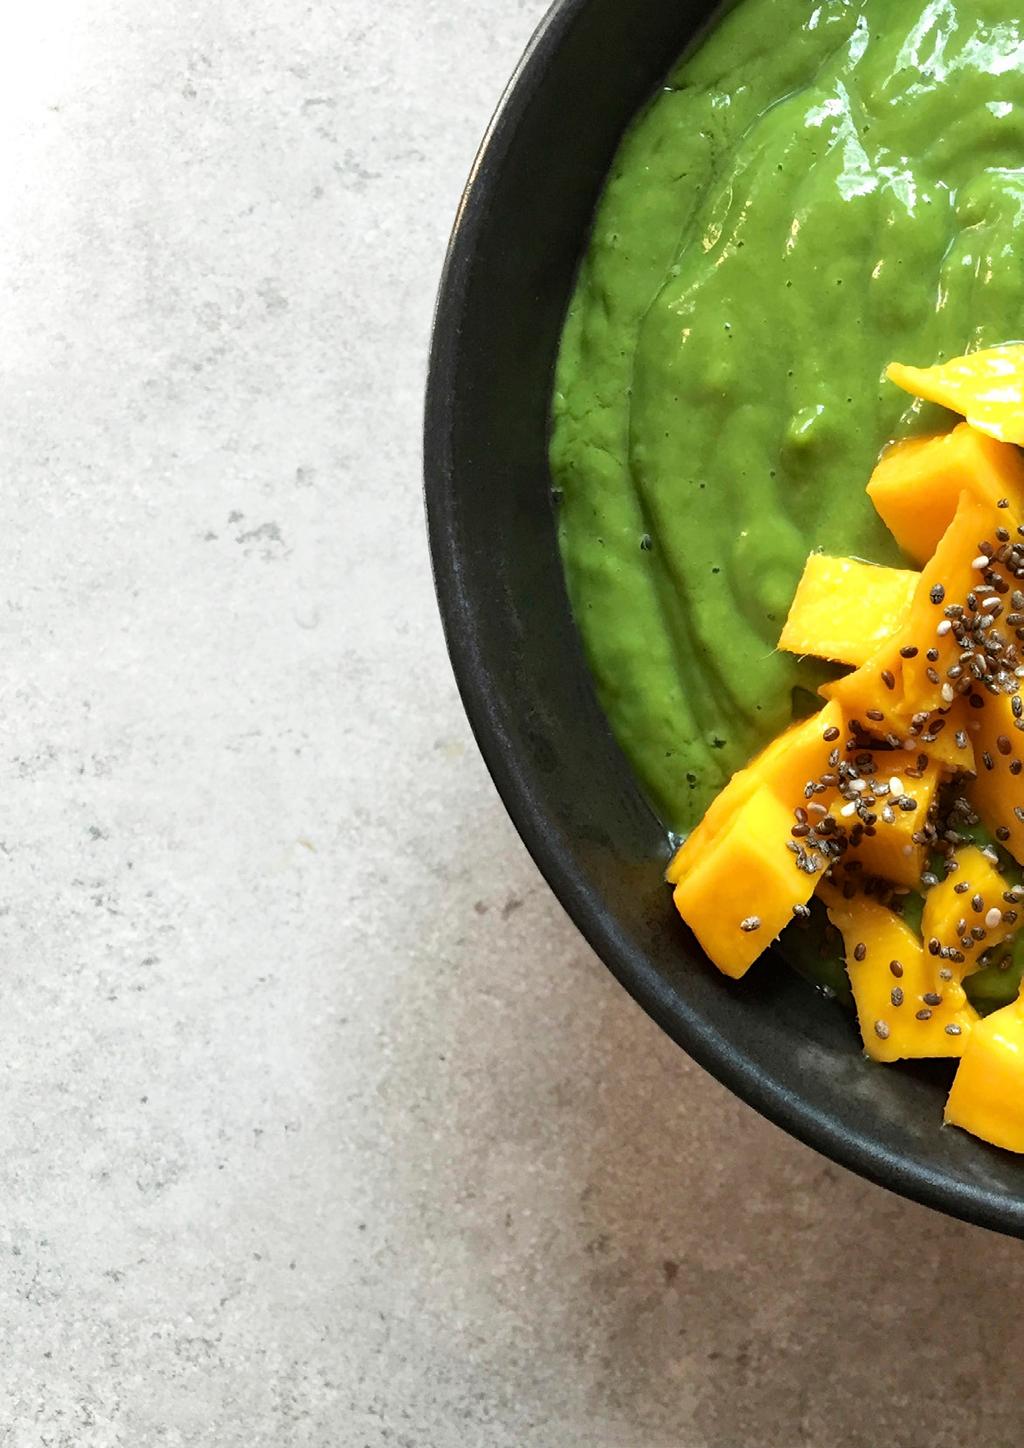 Avocado Smoothie Bowl Wheatgrass powder is alkalising, high in Antioxidants, Chlorophyll and Fibre. A teaspoon instantly adds that revitalising Super Green boost.